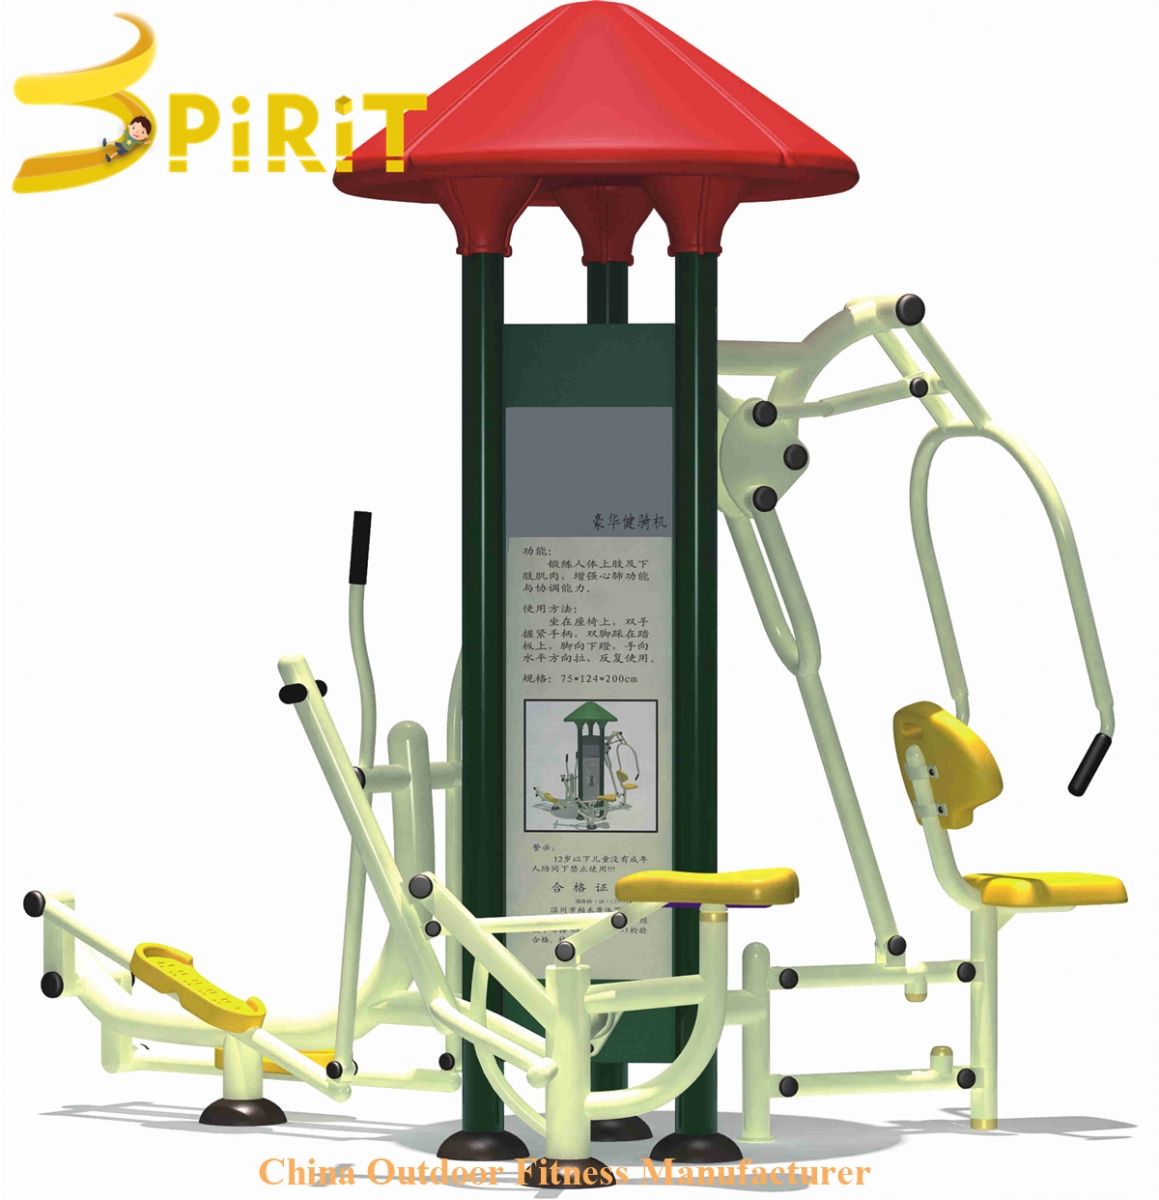 Buy outdoor gym equipment for beginners in park-SPIRIT PLAY,Outdoor Playground, Indoor Playground,Trampoline Park,Outdoor Fitness,Inflatable,Soft Playground,Ninja Warrior,Trampoline Park,Playground Structure,Play Structure,Outdoor Fitness,Water Park,Play System,Freestanding,Interactive,independente ,Inklusibo, Park, Pagsaka sa Bungbong, Dula sa Bata